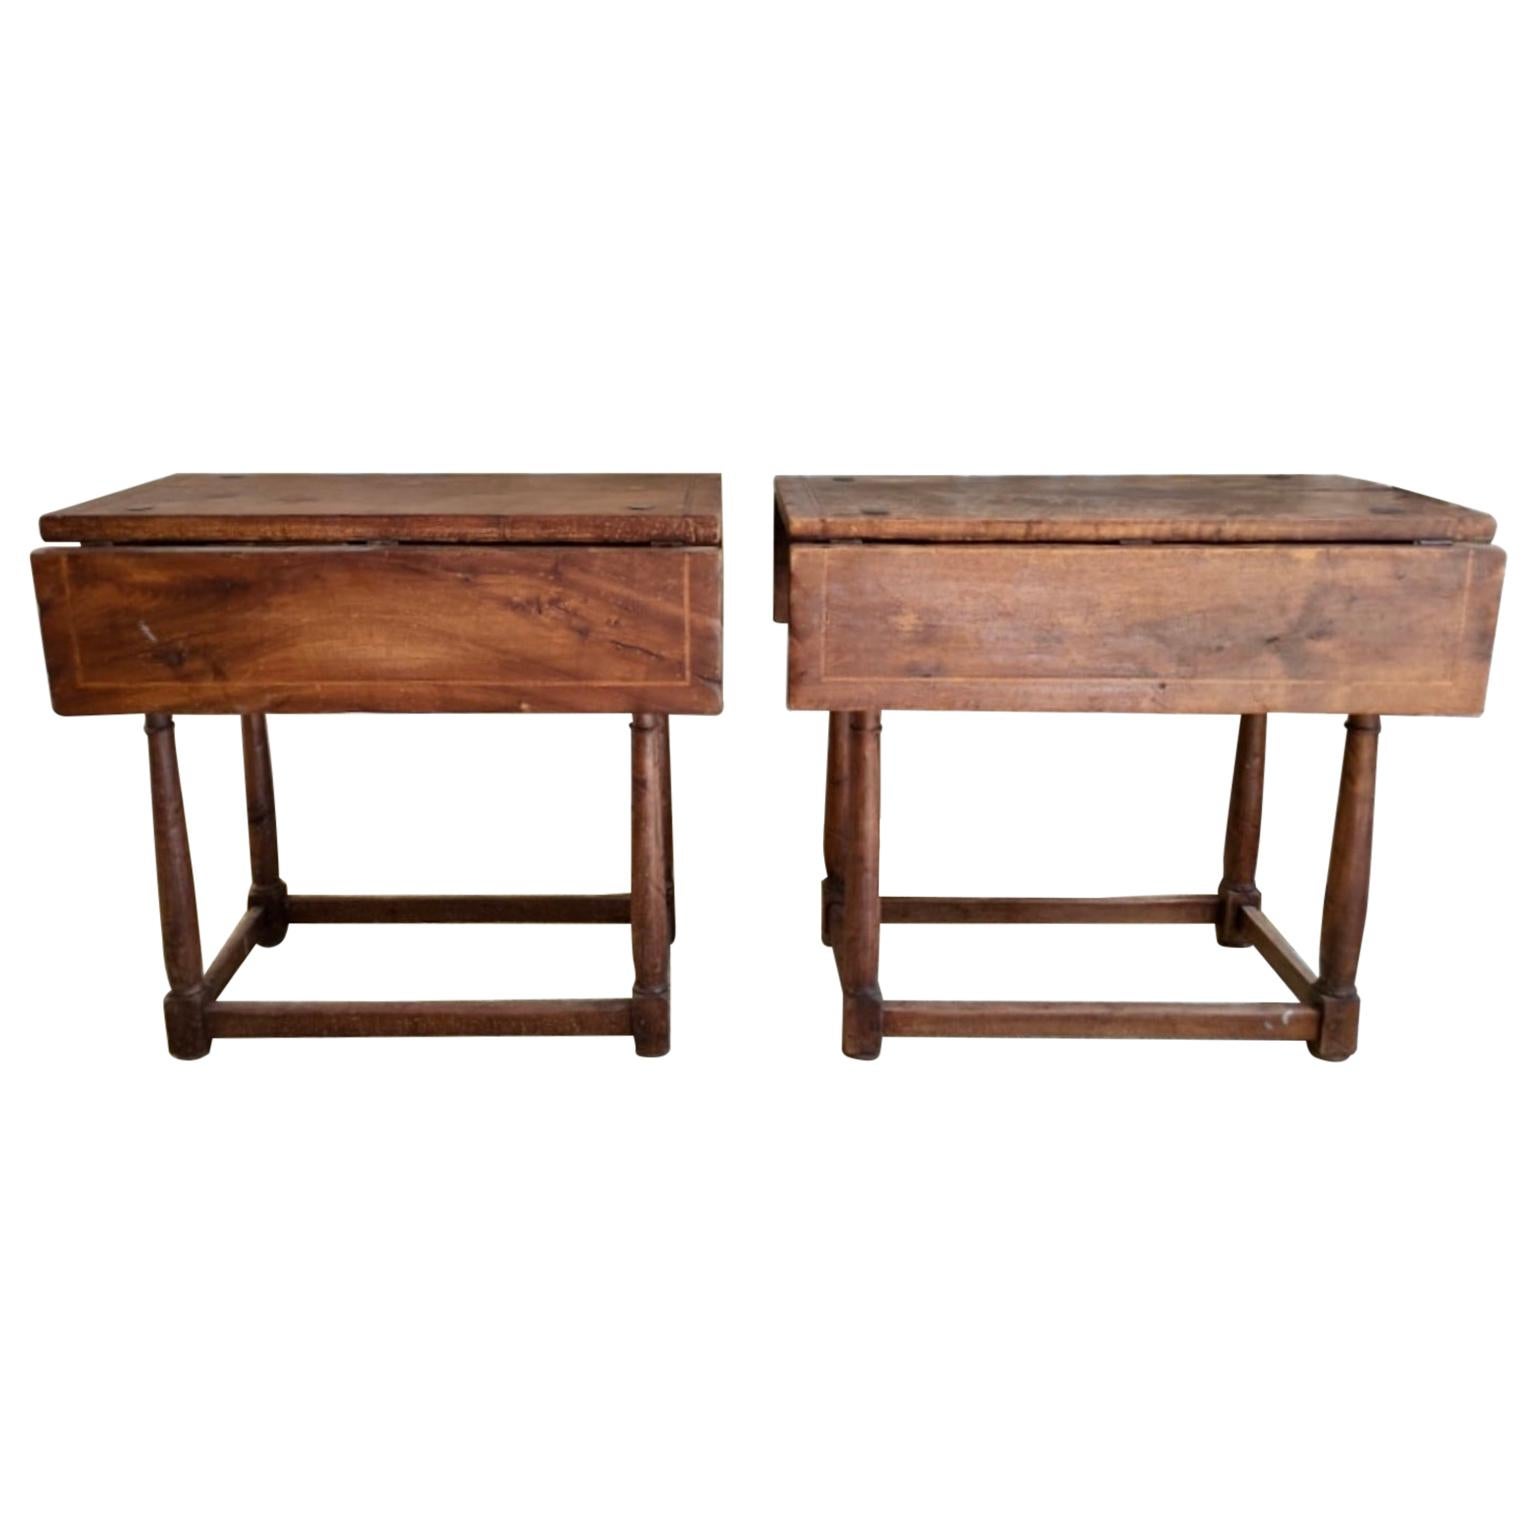 20th Century Pair Spanish Walnut Extending Side Tables with Drawer